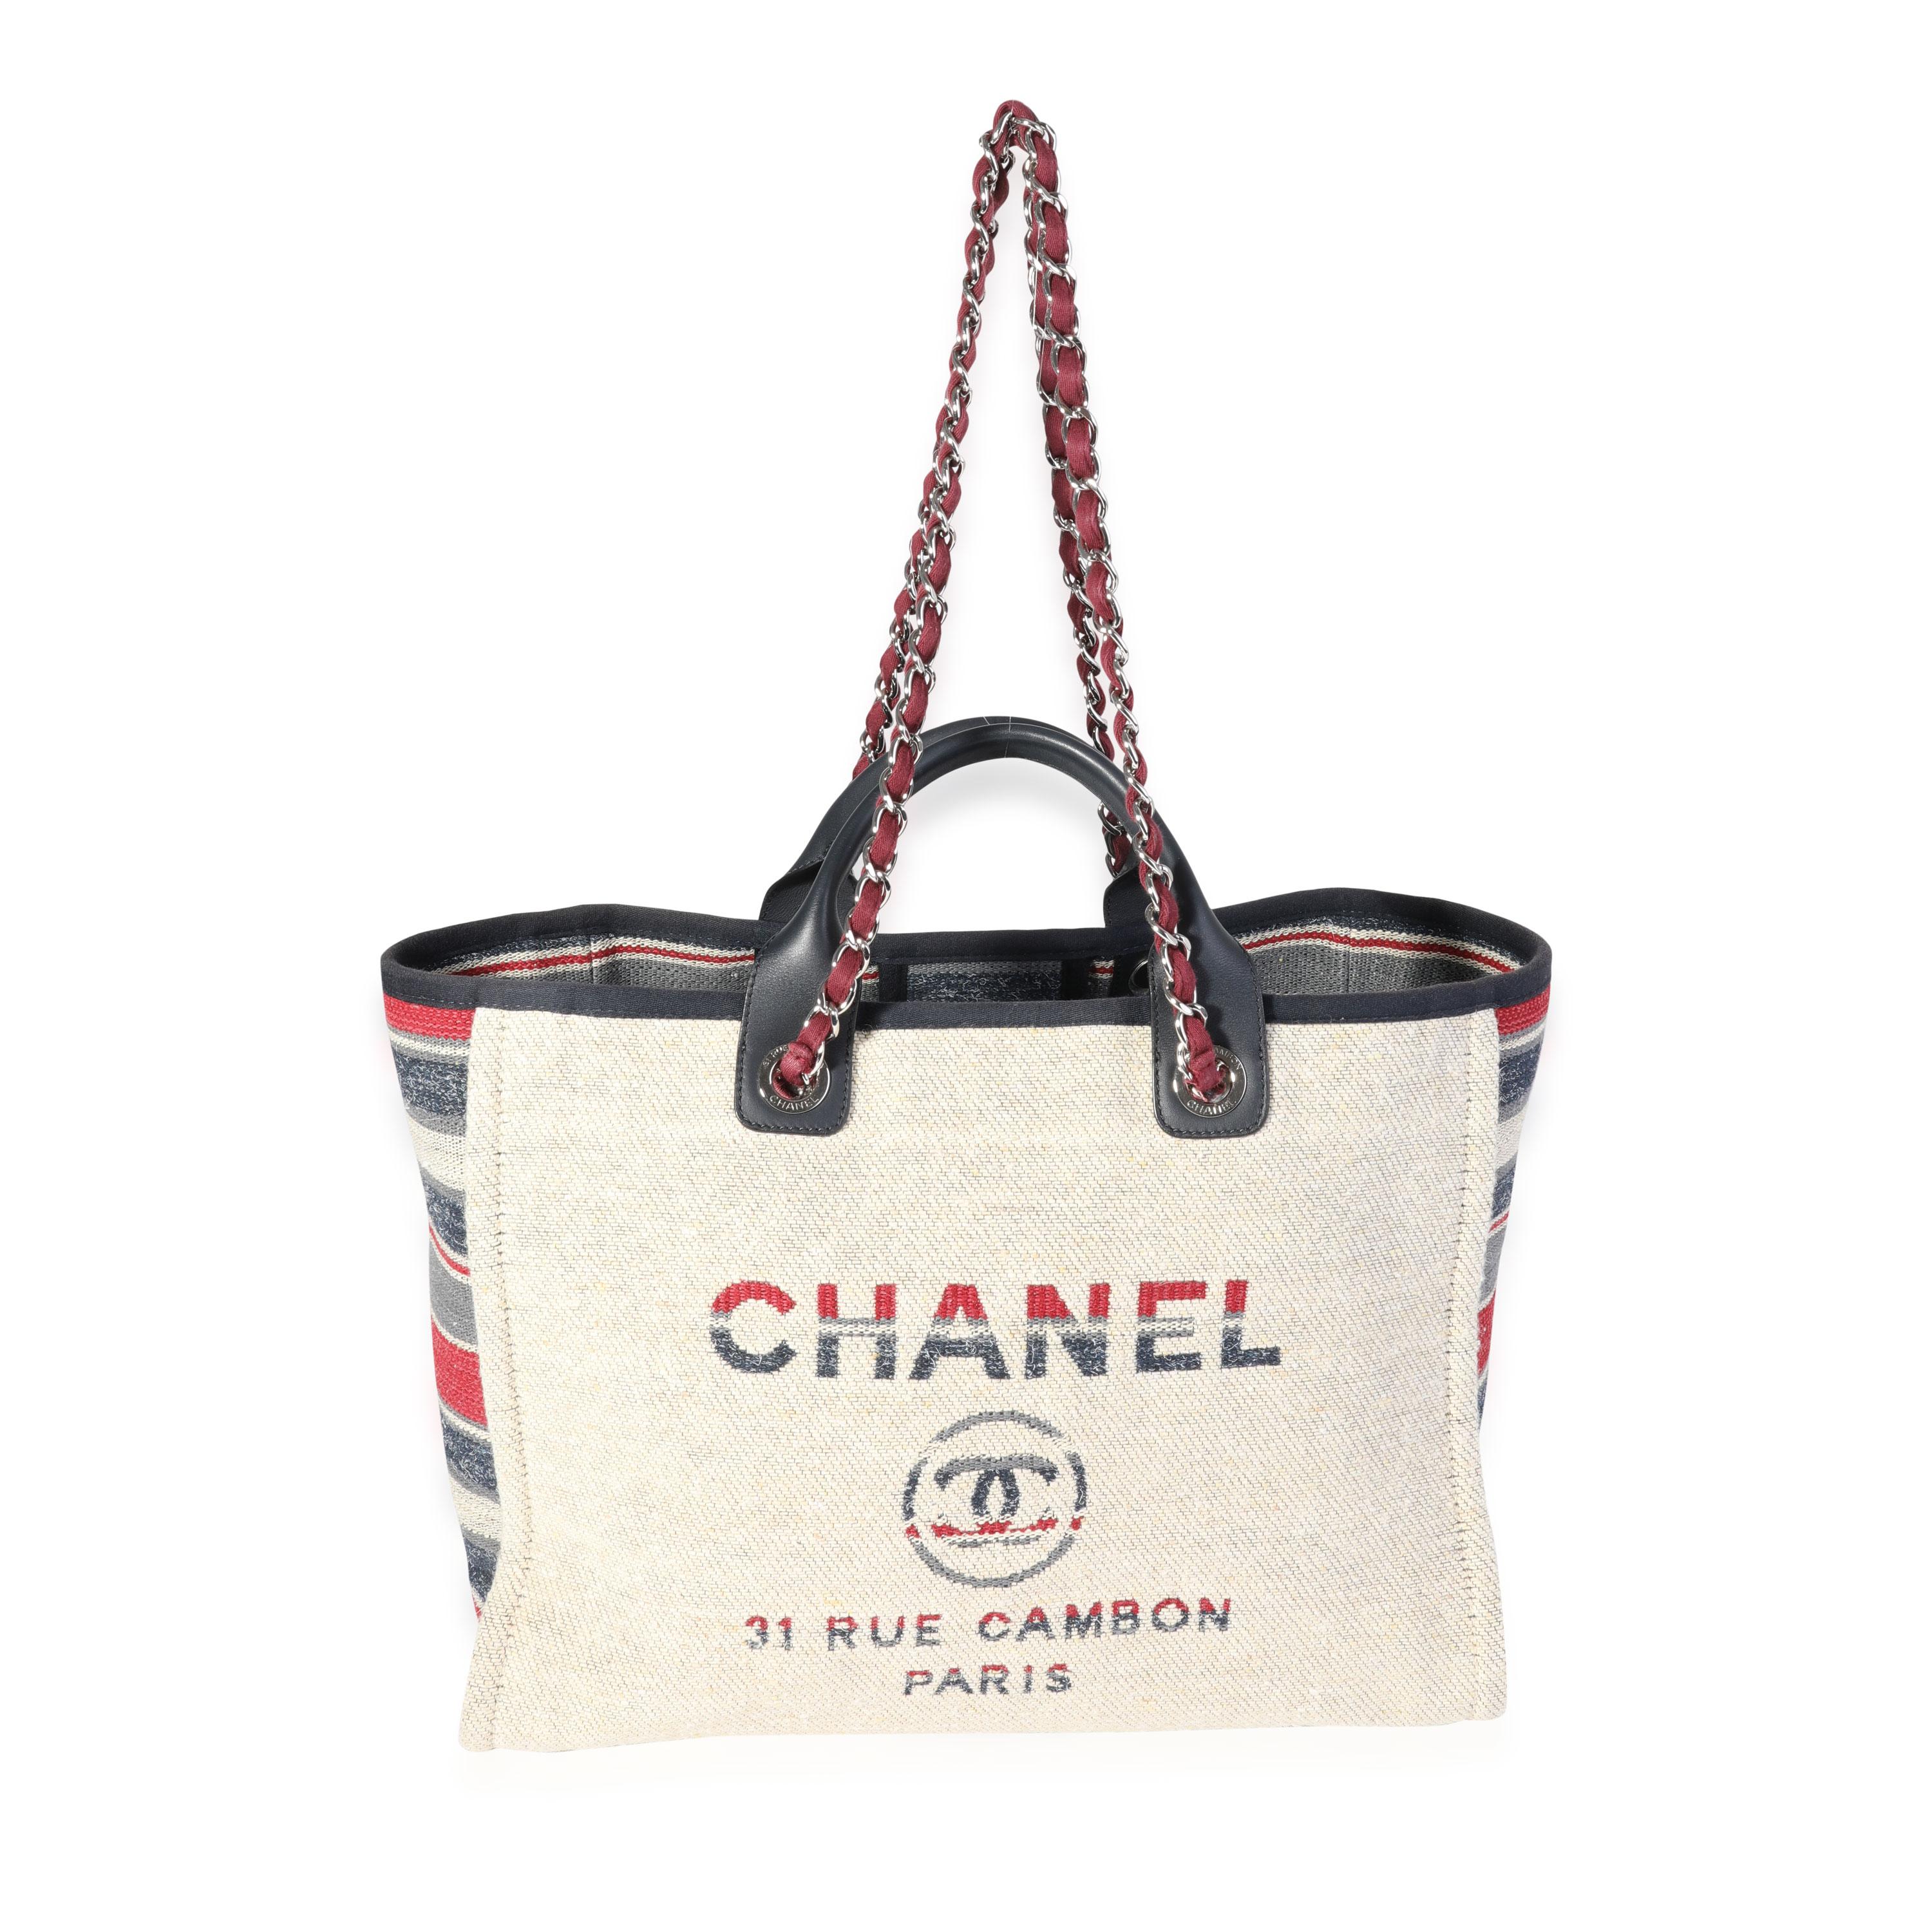 Listing Title: Chanel Paris-Hamburg Multicolor Striped Wool large Deauville Tote
SKU: 120668
Condition: Pre-owned 
Handbag Condition: Very Good
Condition Comments: Very Good Condition. Light scratching to hardware. Light marks throughout